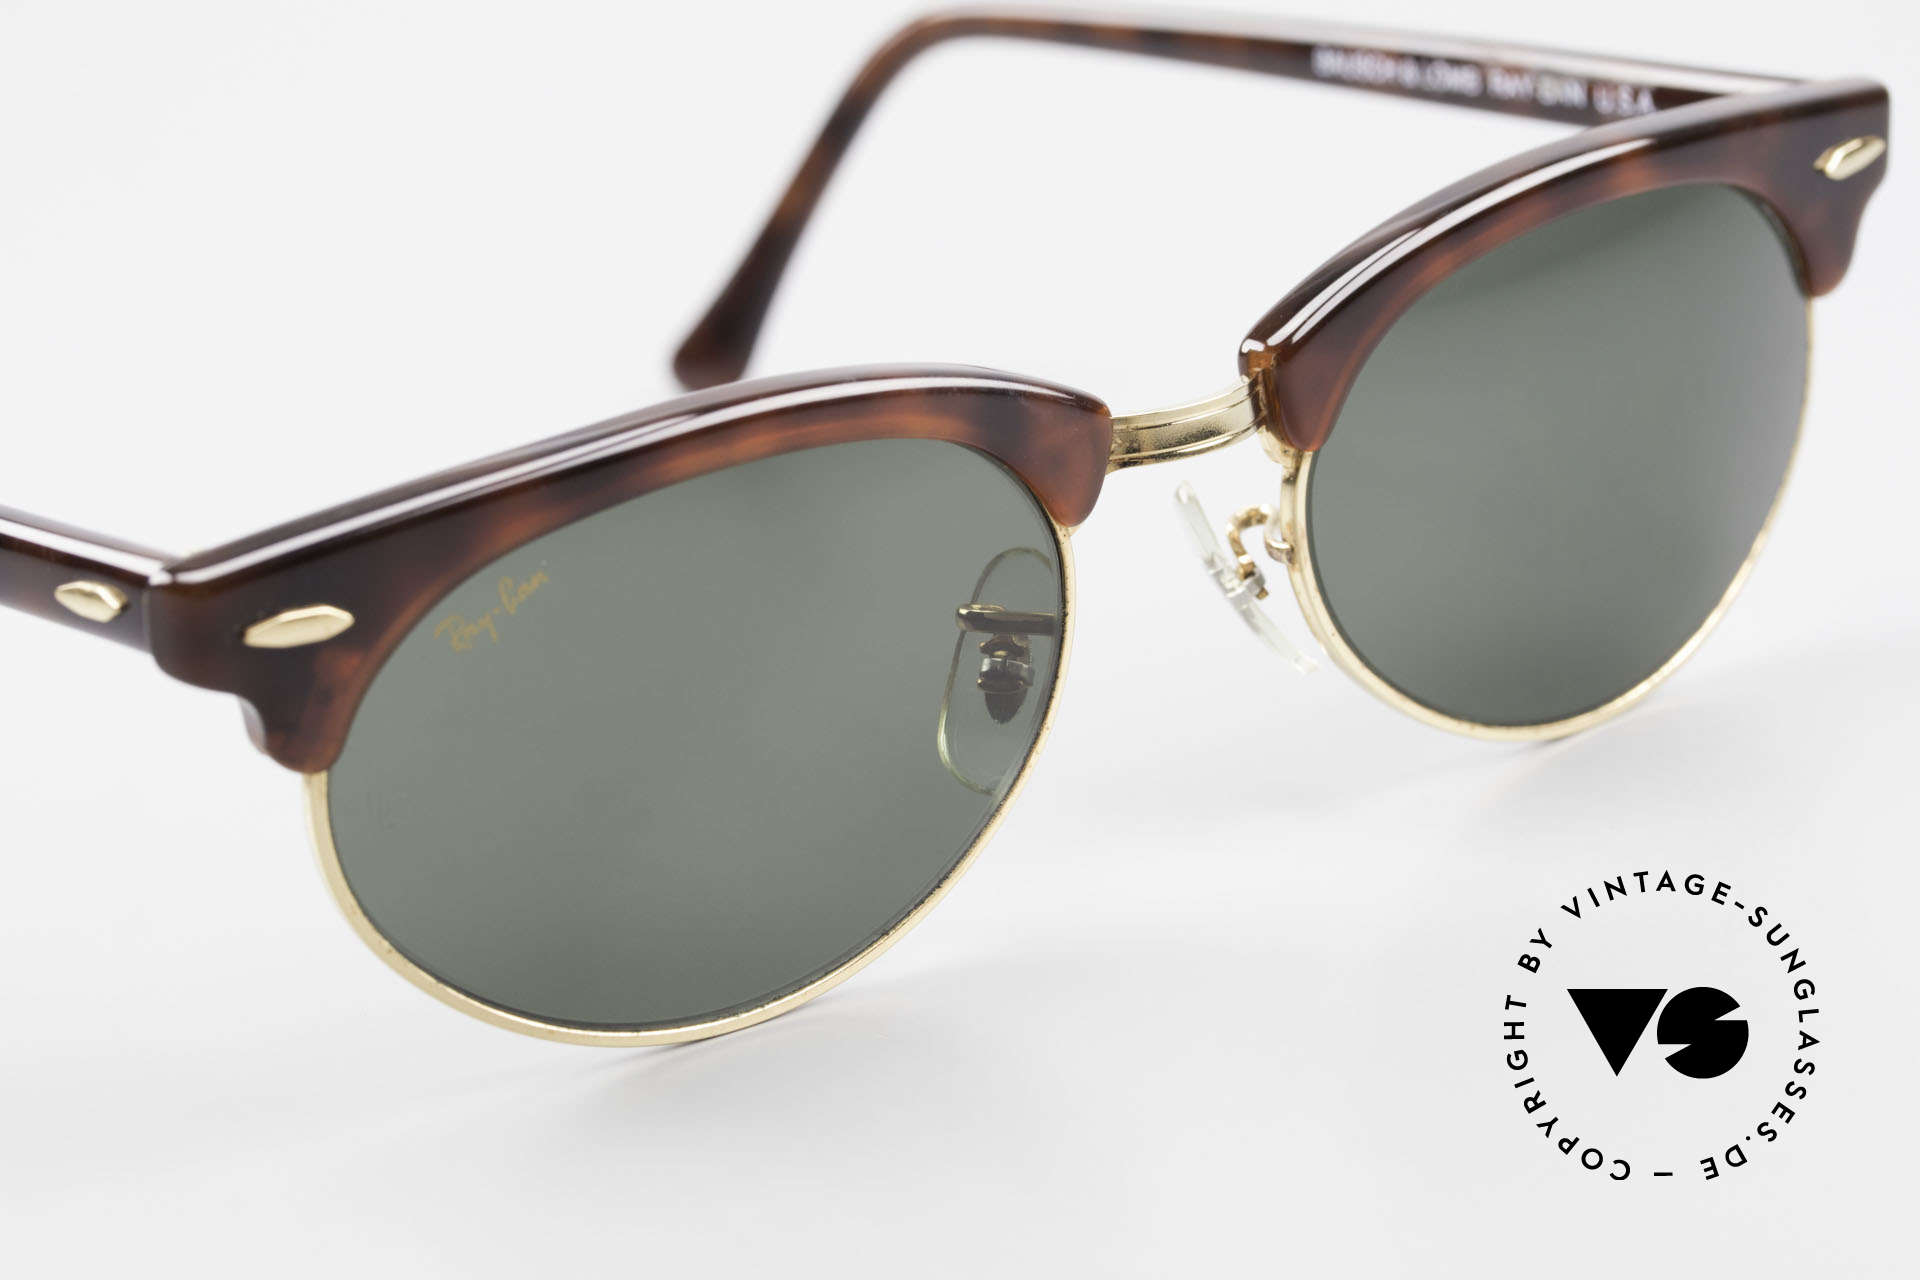 Ray Ban Clubmaster Oval 80's Bausch & Lomb Original, orig. name: Clubmaster Oval, W1264, G-15, 54x19, Made for Men and Women